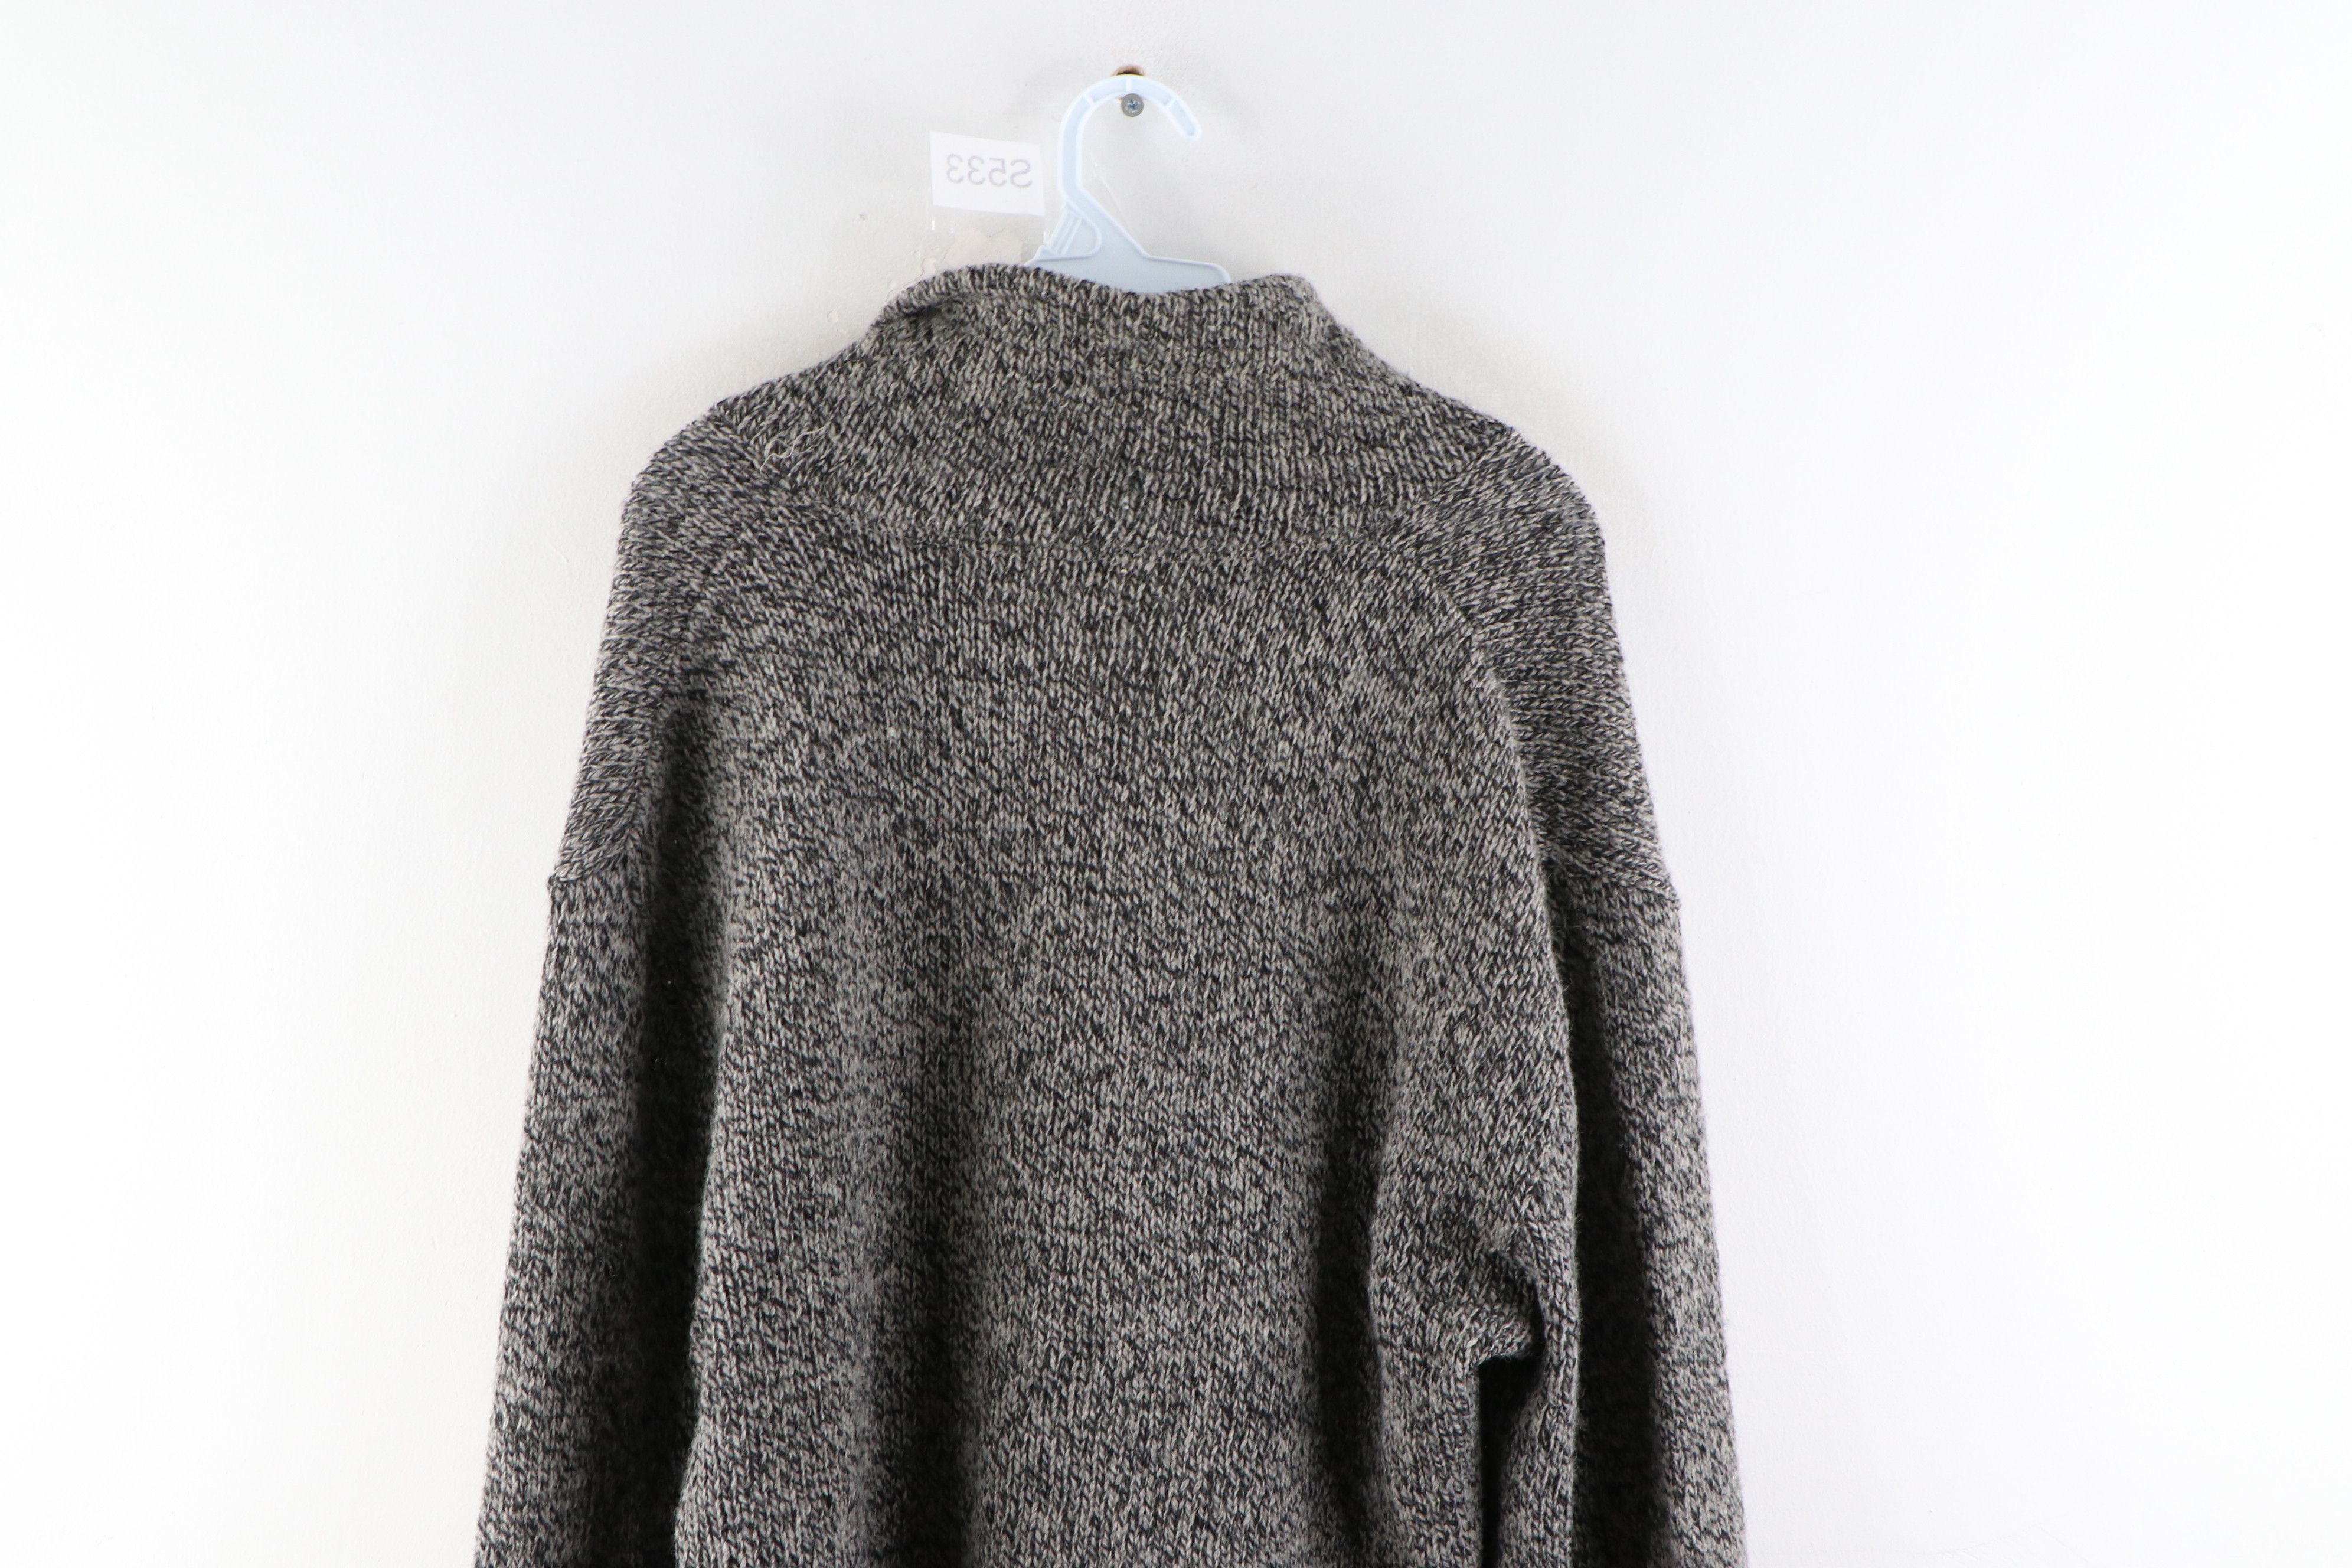 American Eagle Outfitters Vintage 90s American Eagle Wool Knit Shawl Collar Sweater Size US L / EU 52-54 / 3 - 6 Thumbnail